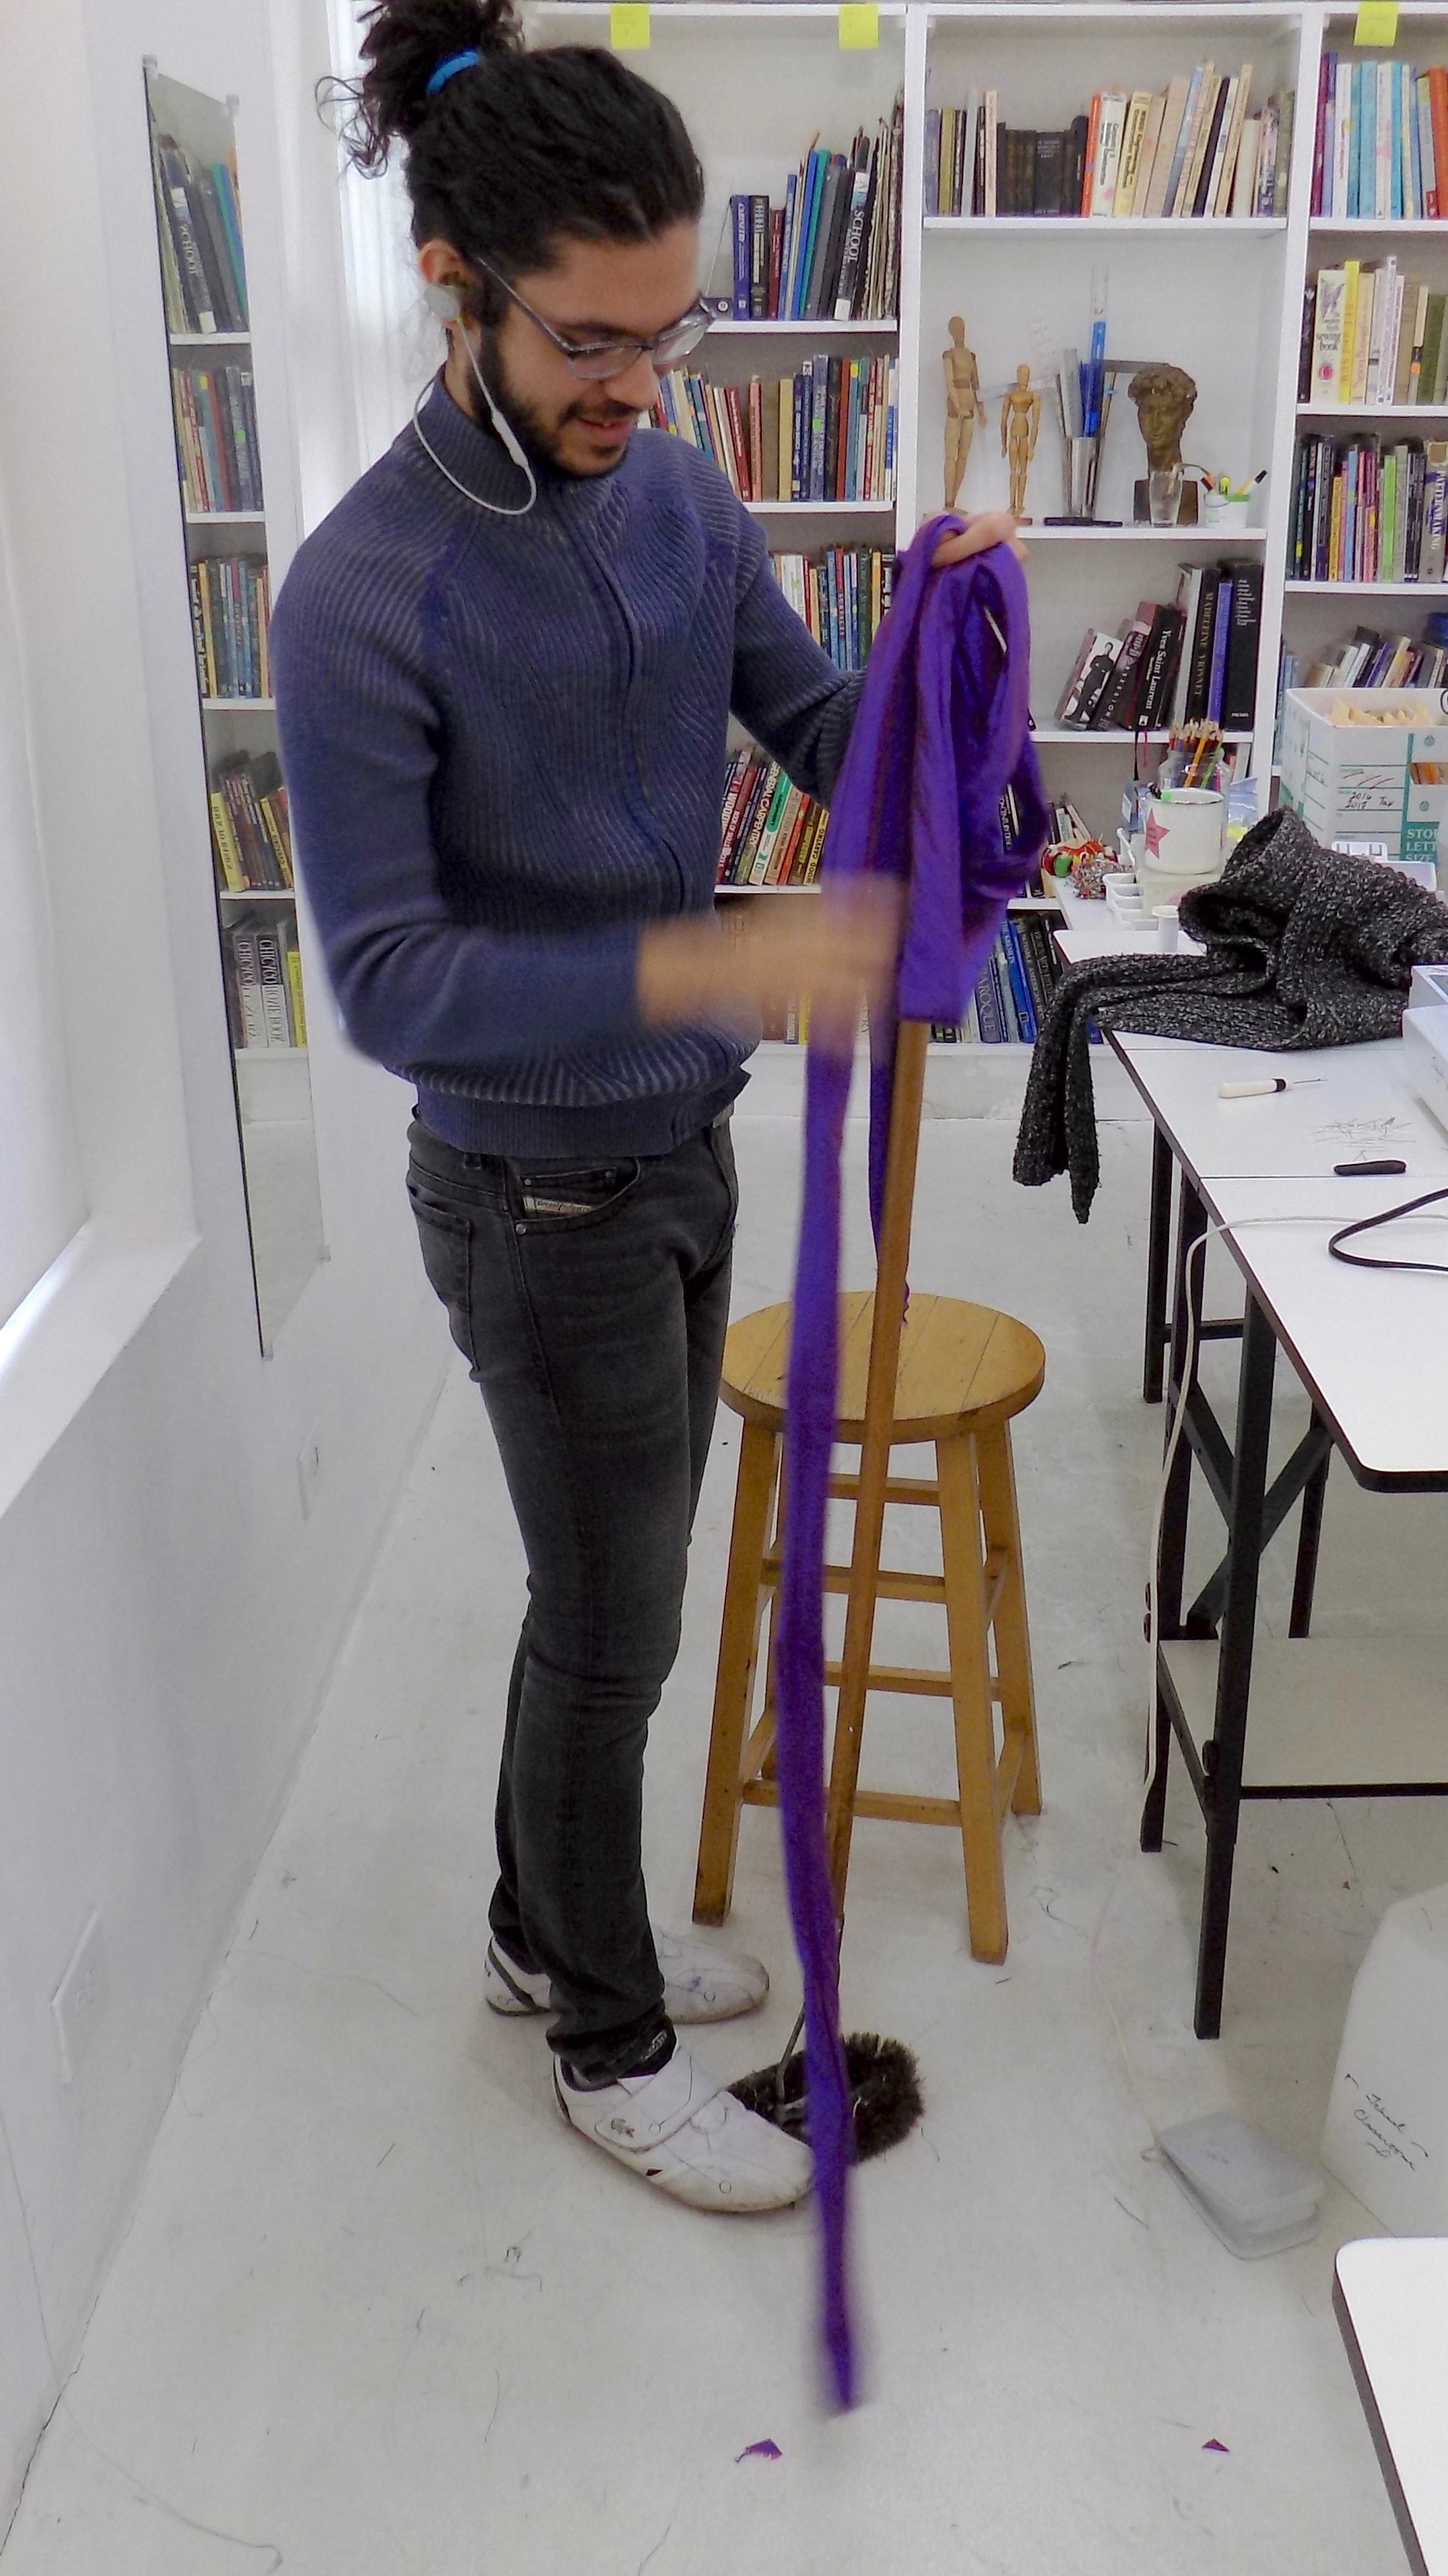 sewing classes in chicago: tchad: thinking outside the box: workroom: turning: nathan: silk